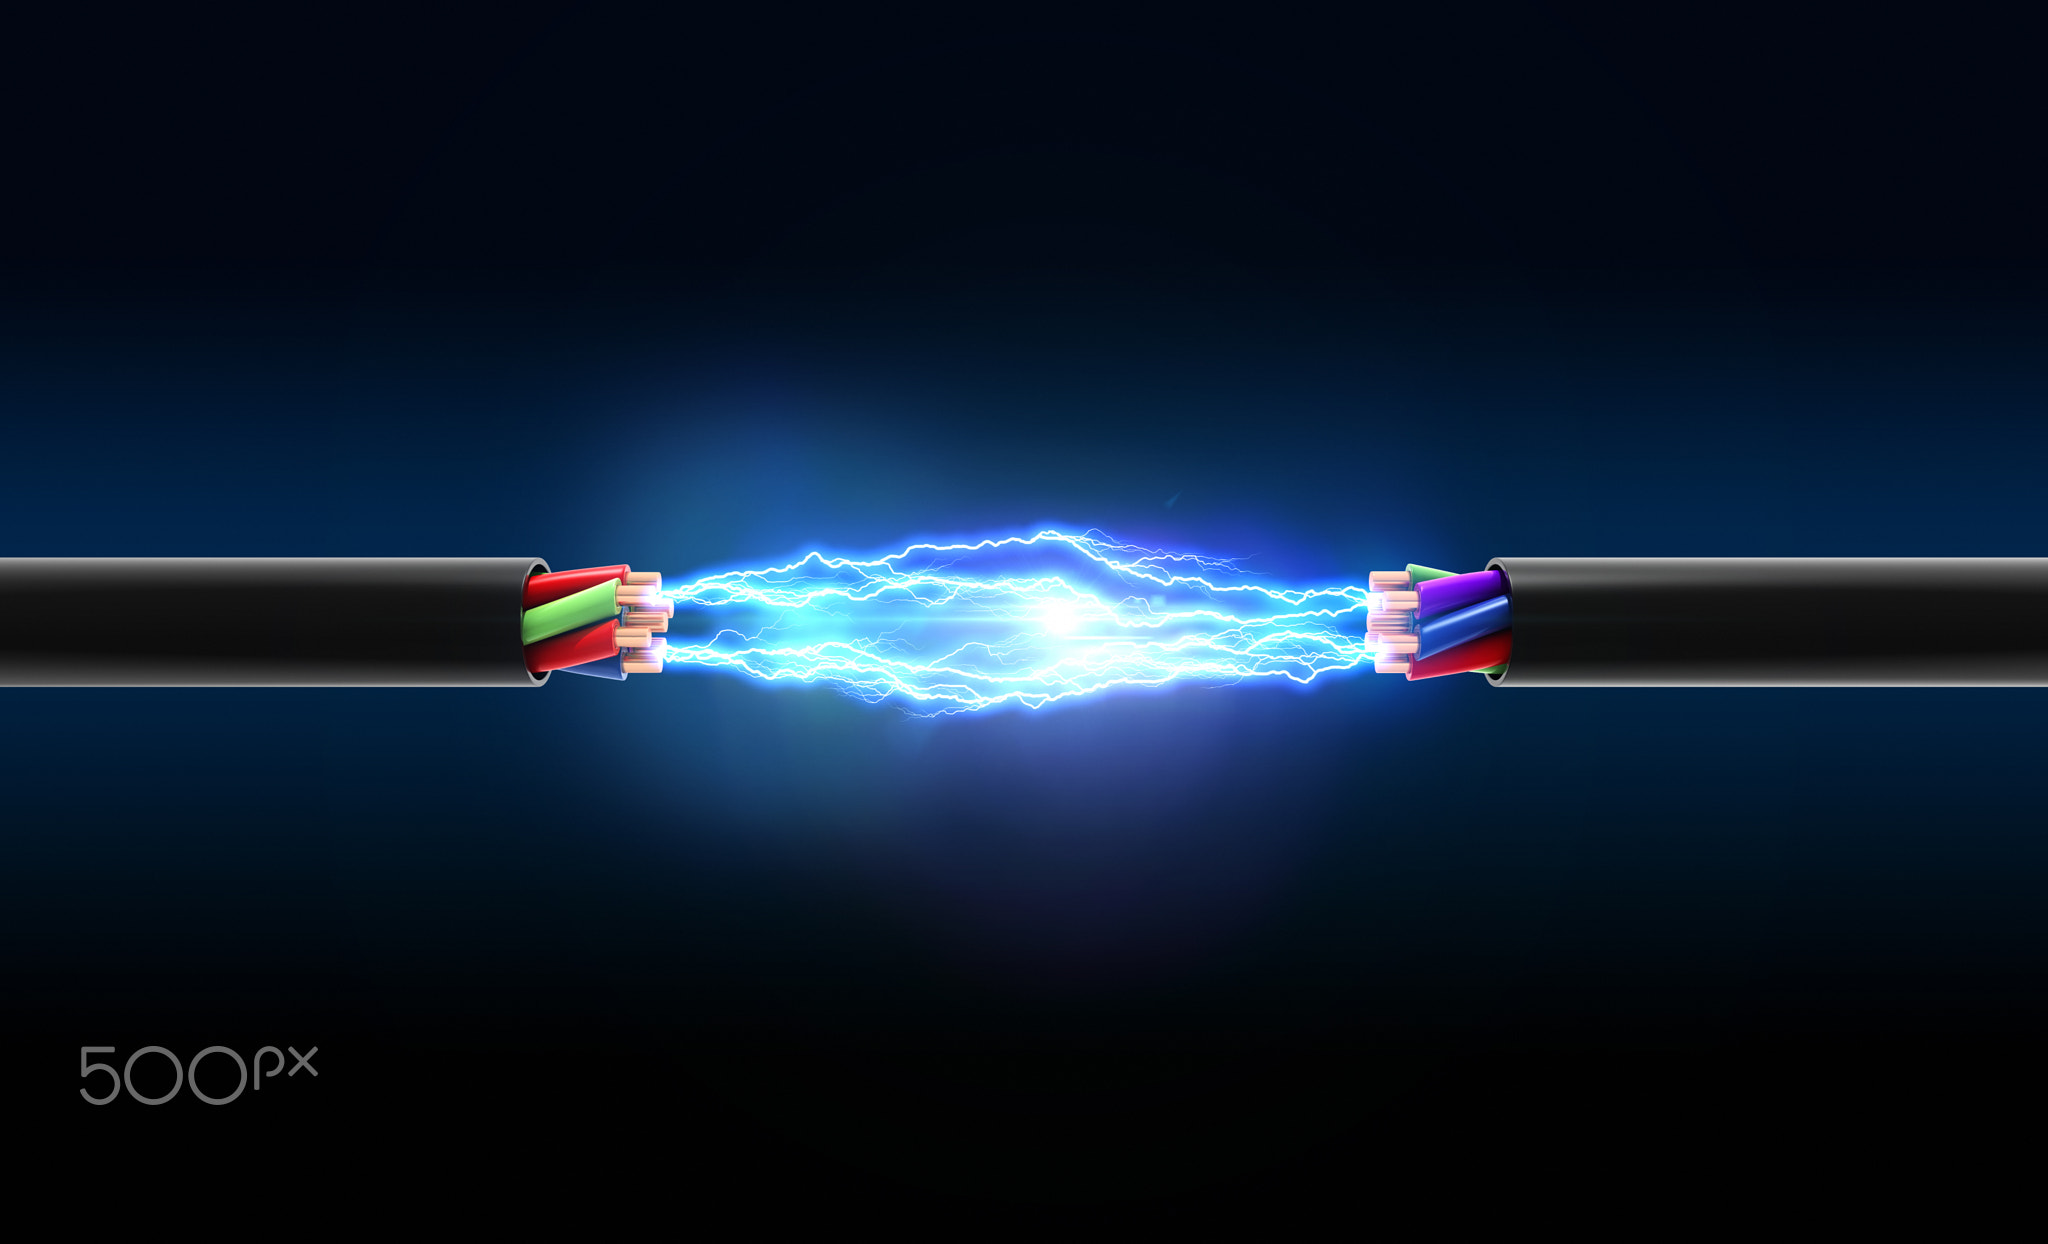 Electrical Spark Between Two Wires Wallpapers HD / Desktop and Mobile